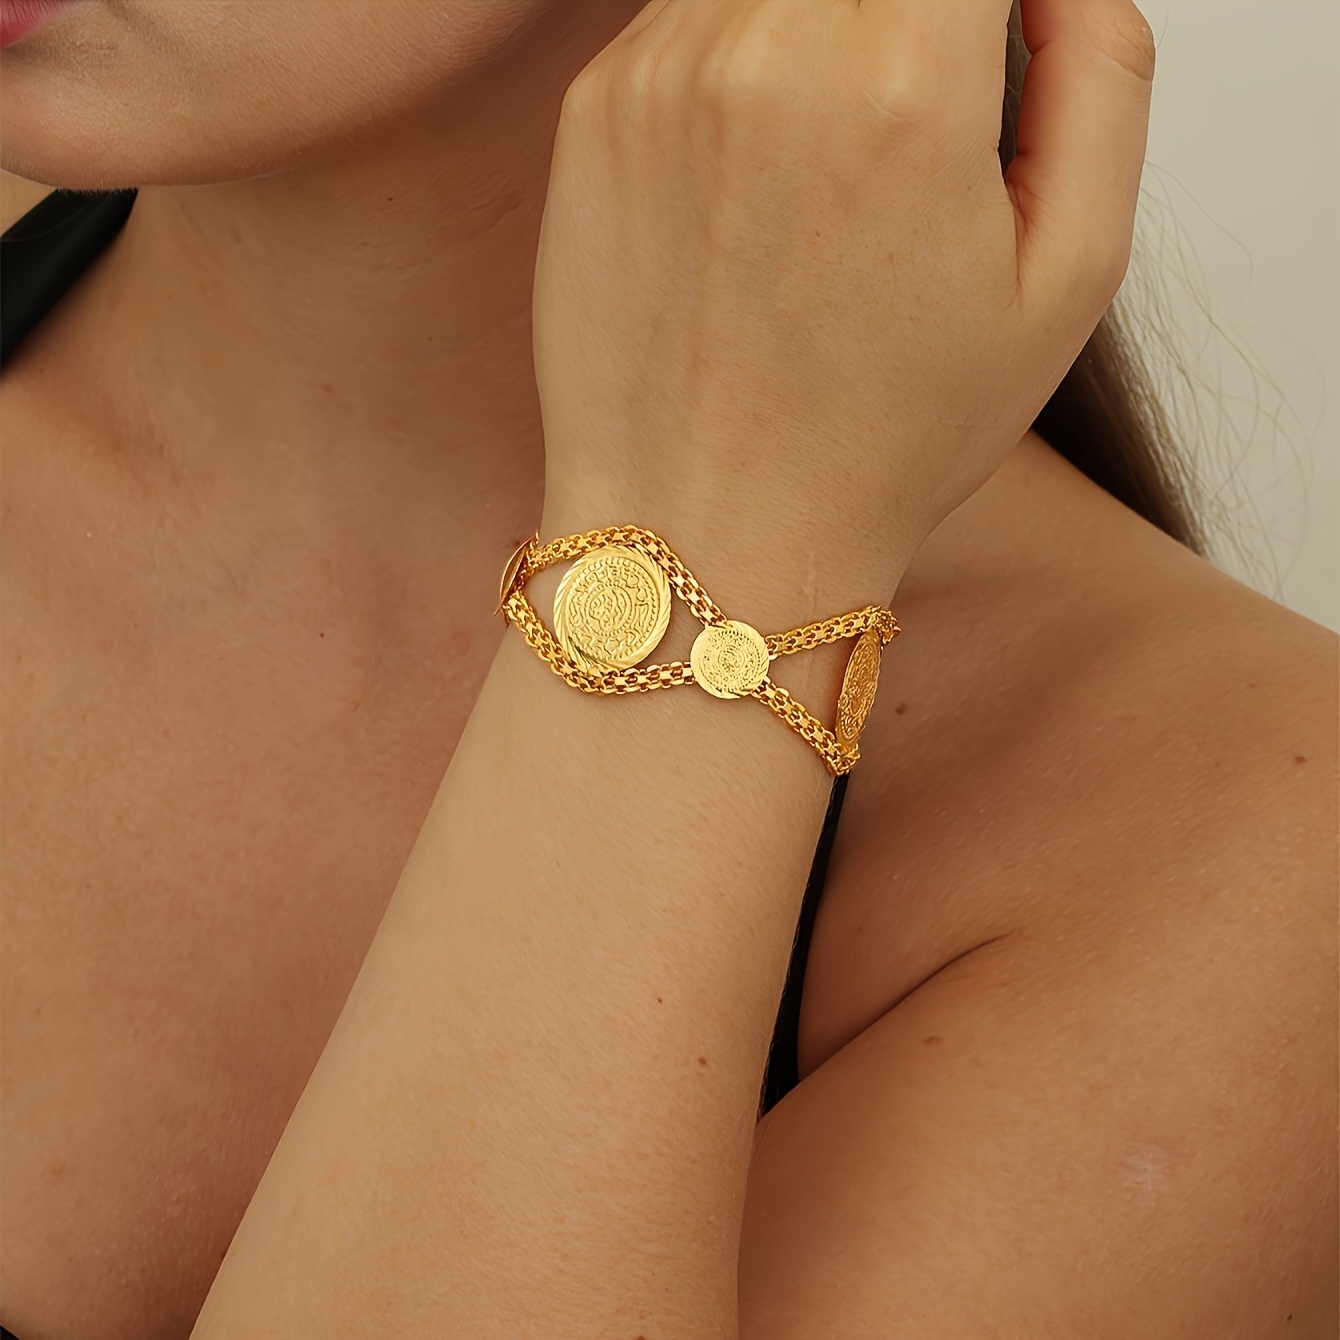 

Plated Coin Bracelet, Retro Vintage Style, Romantic Valentine's Day Present, Middle Eastern Holiday Season Jewelry, Adjustable Chain